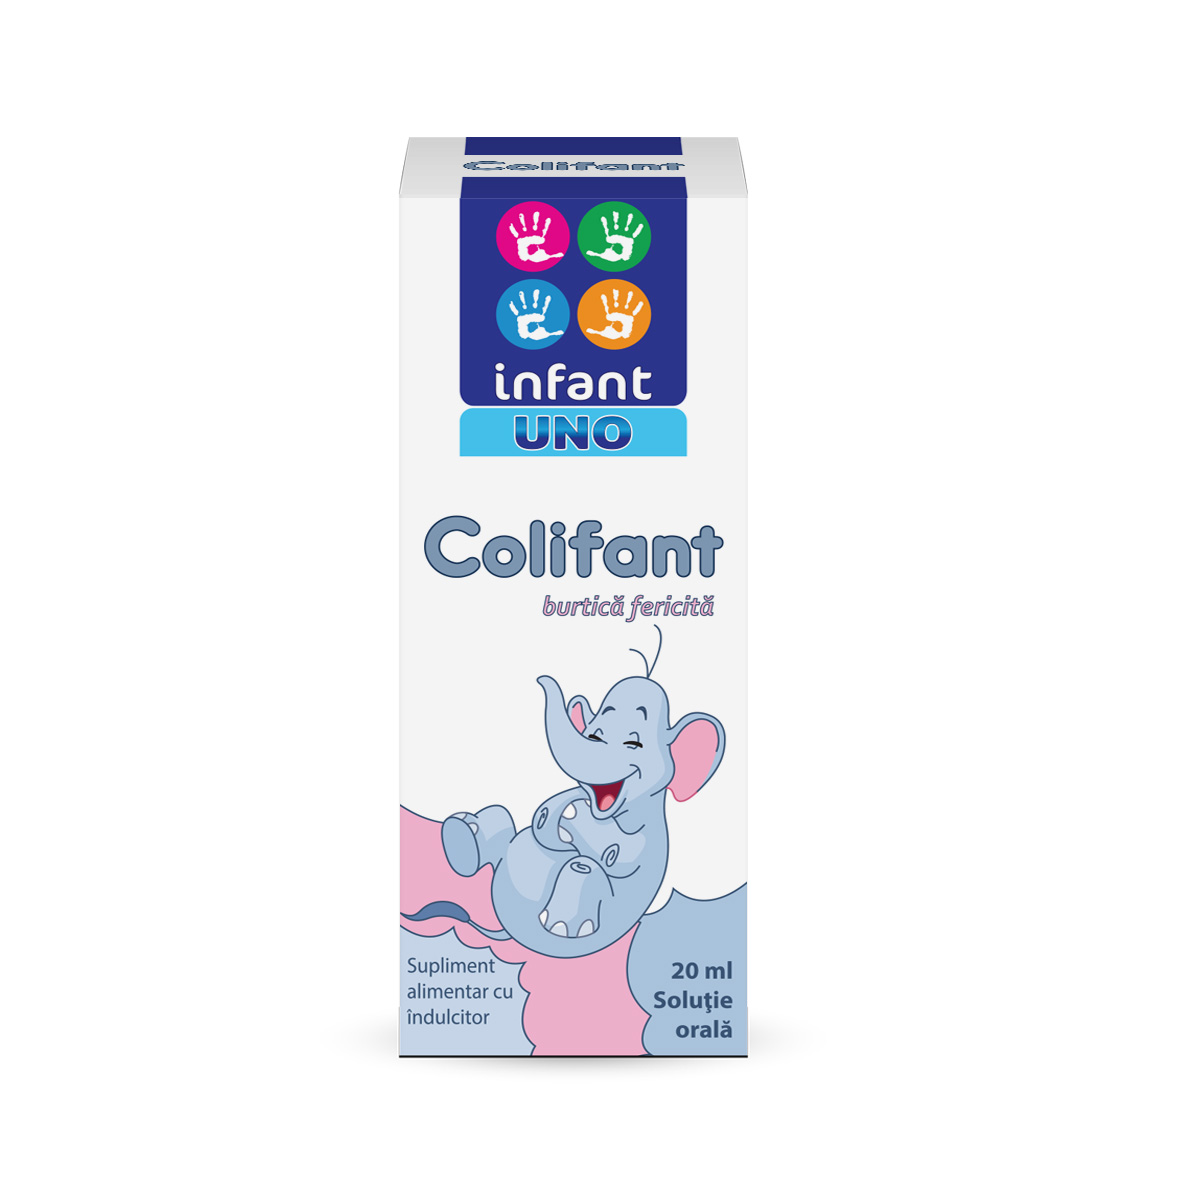 Colifant Infant Uno, 20 ml, Labormed